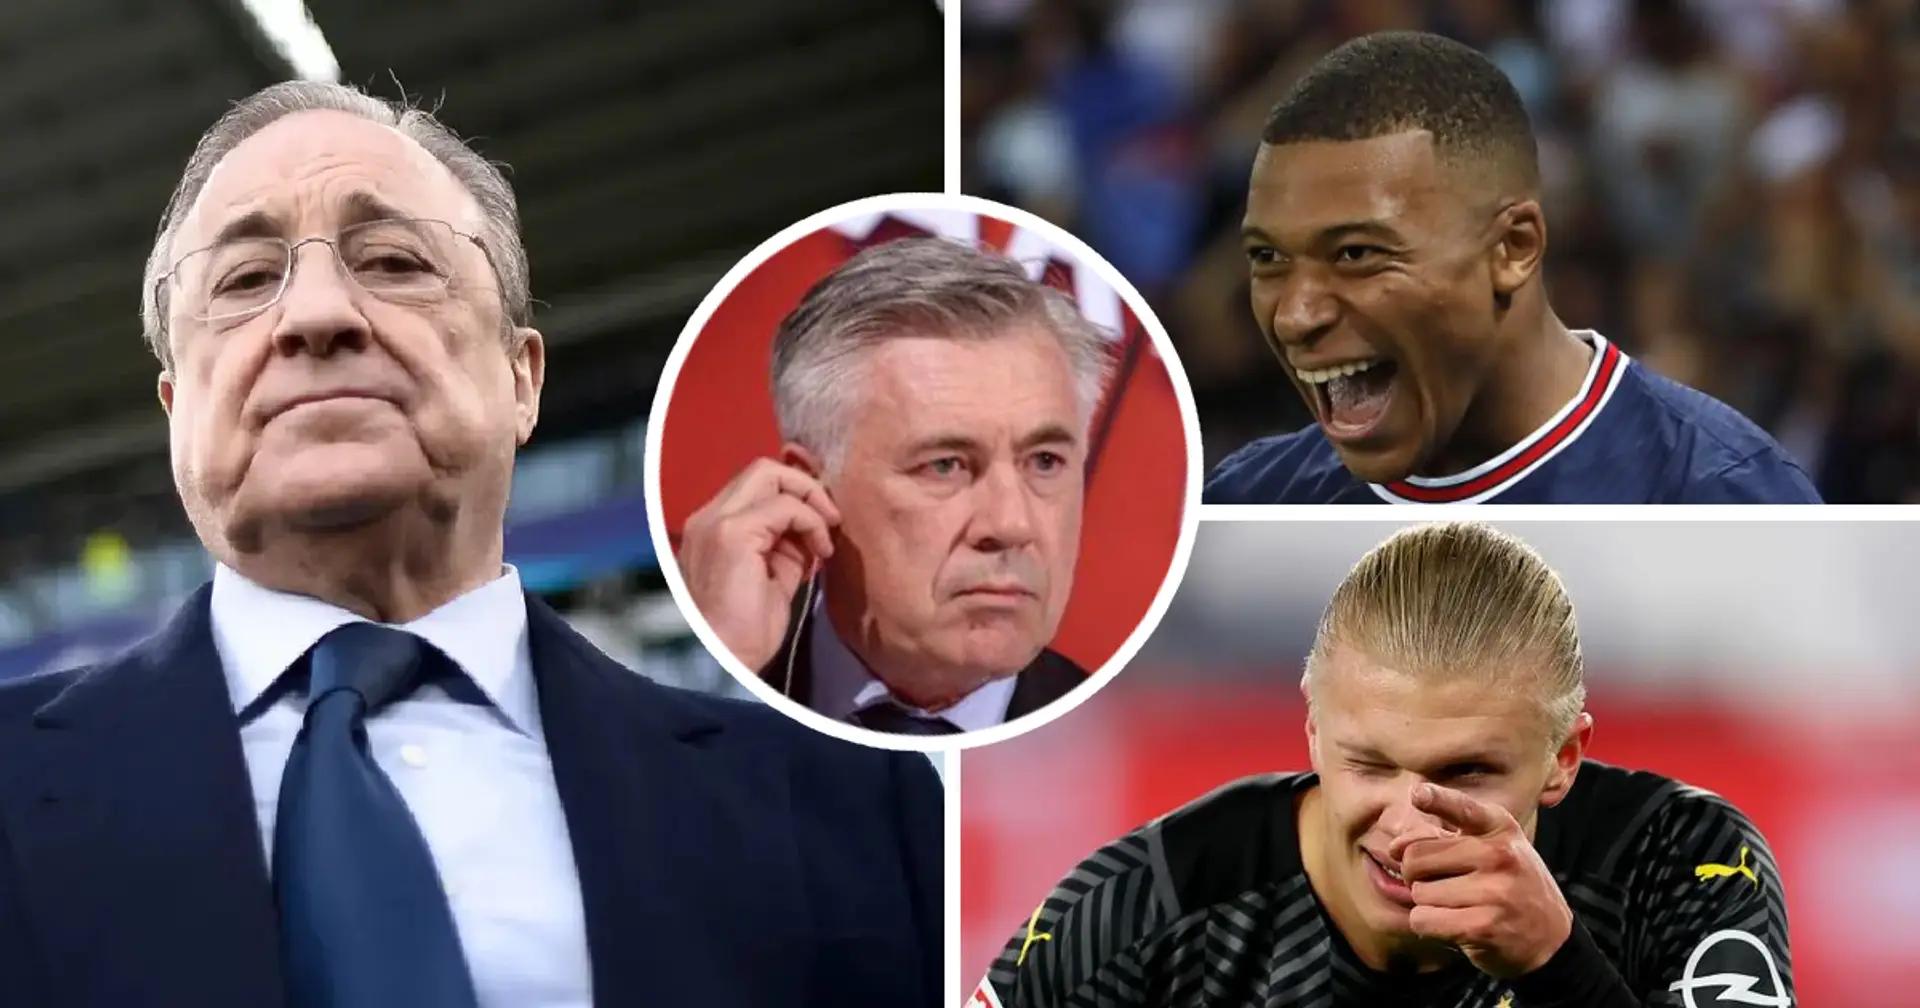 Ancelotti says Perez has 'big plans for July', mentions Haaland, Mbappe